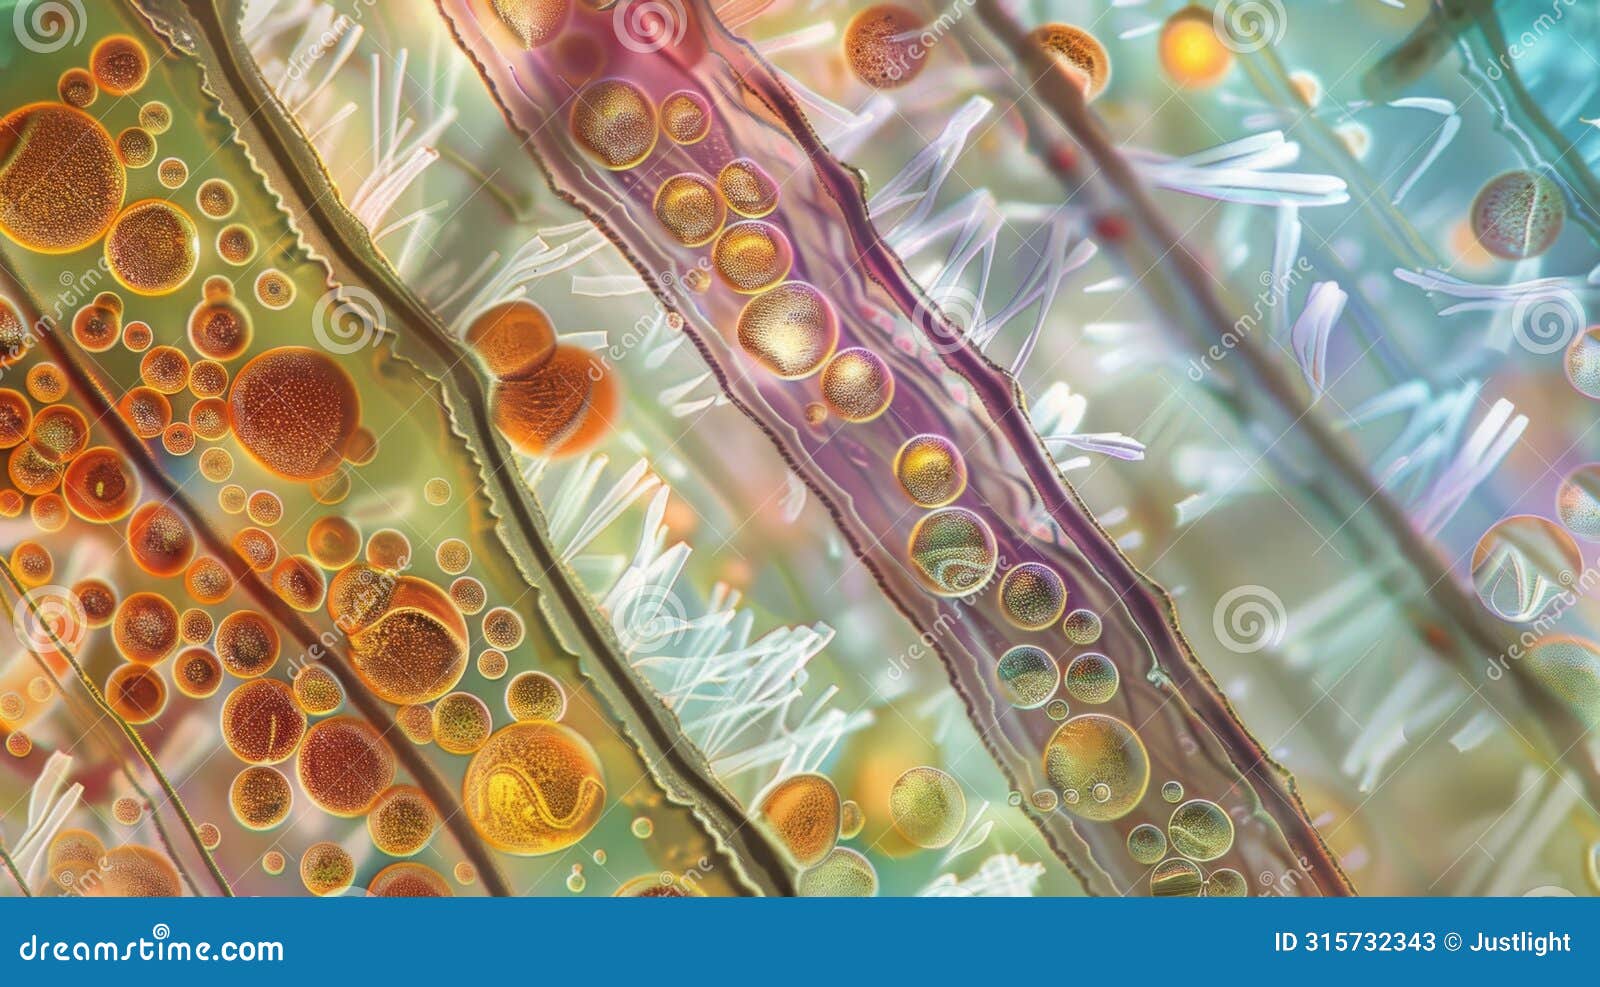 a colorful micrograph of a of euglenoids showing their distinctive reddishbrown chloroplasts and shimmering flagella. .